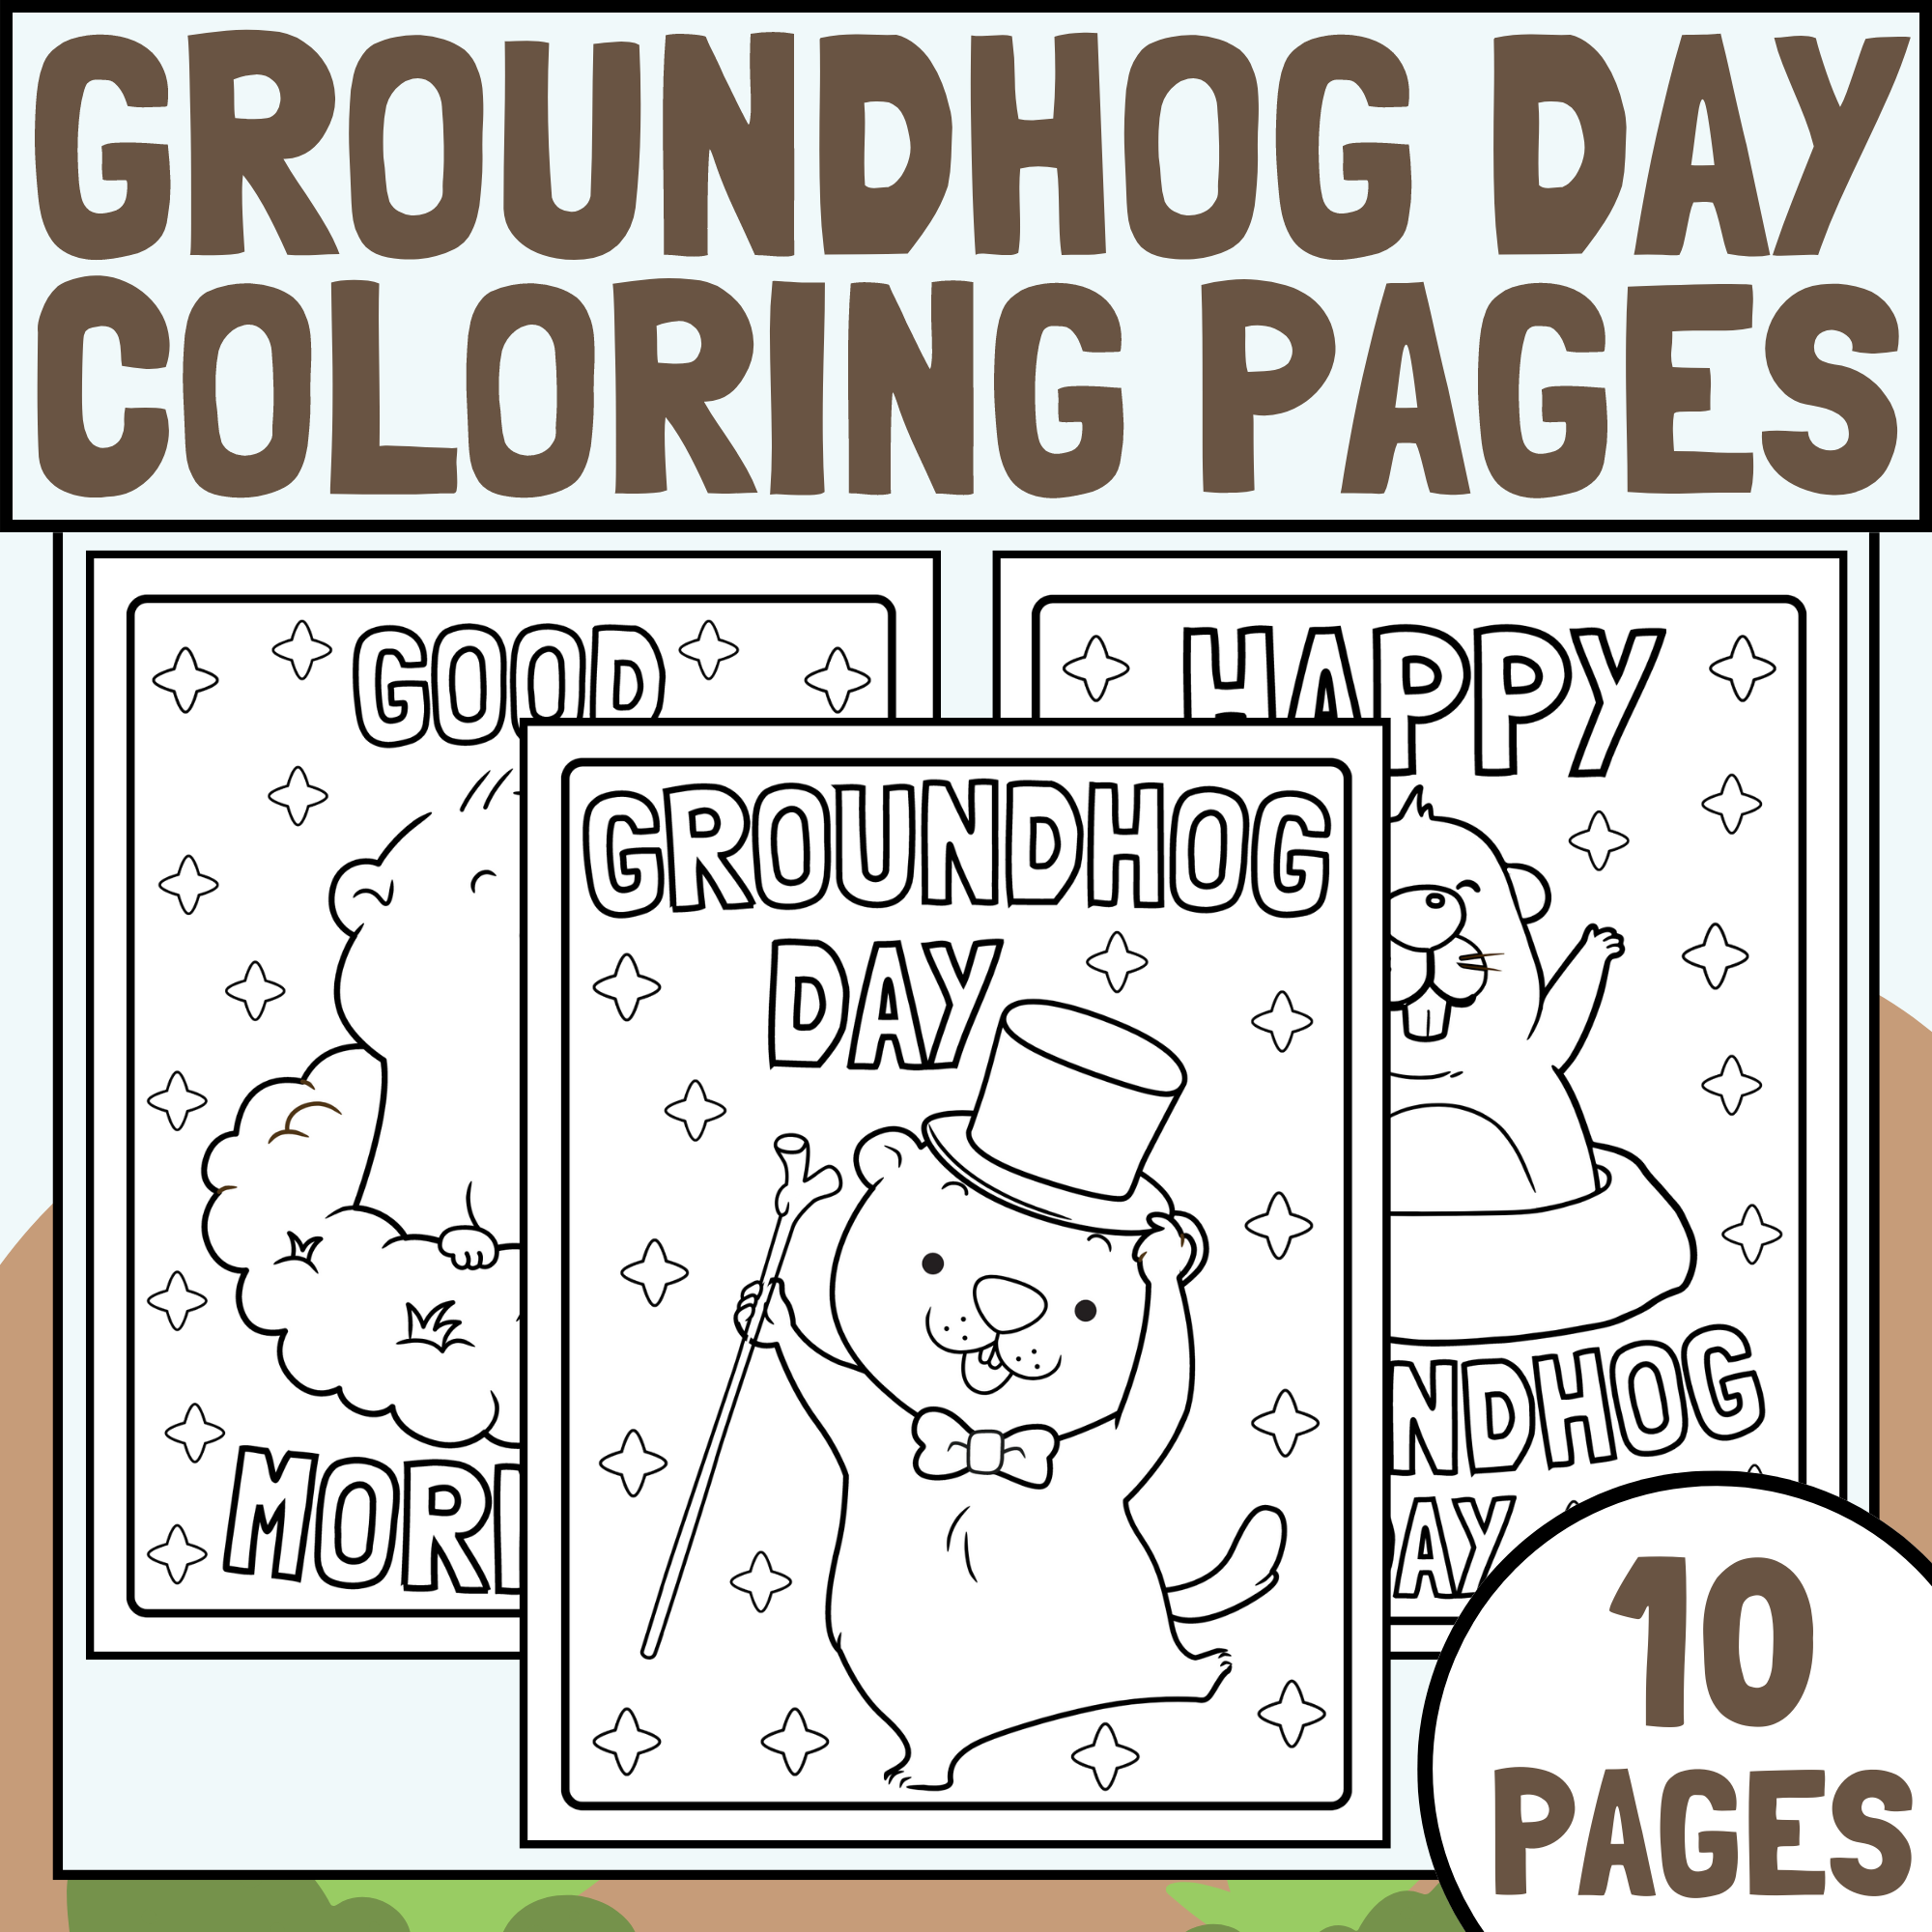 Groundhog day coloring pages groundhog day activities groundhog day made by teachers